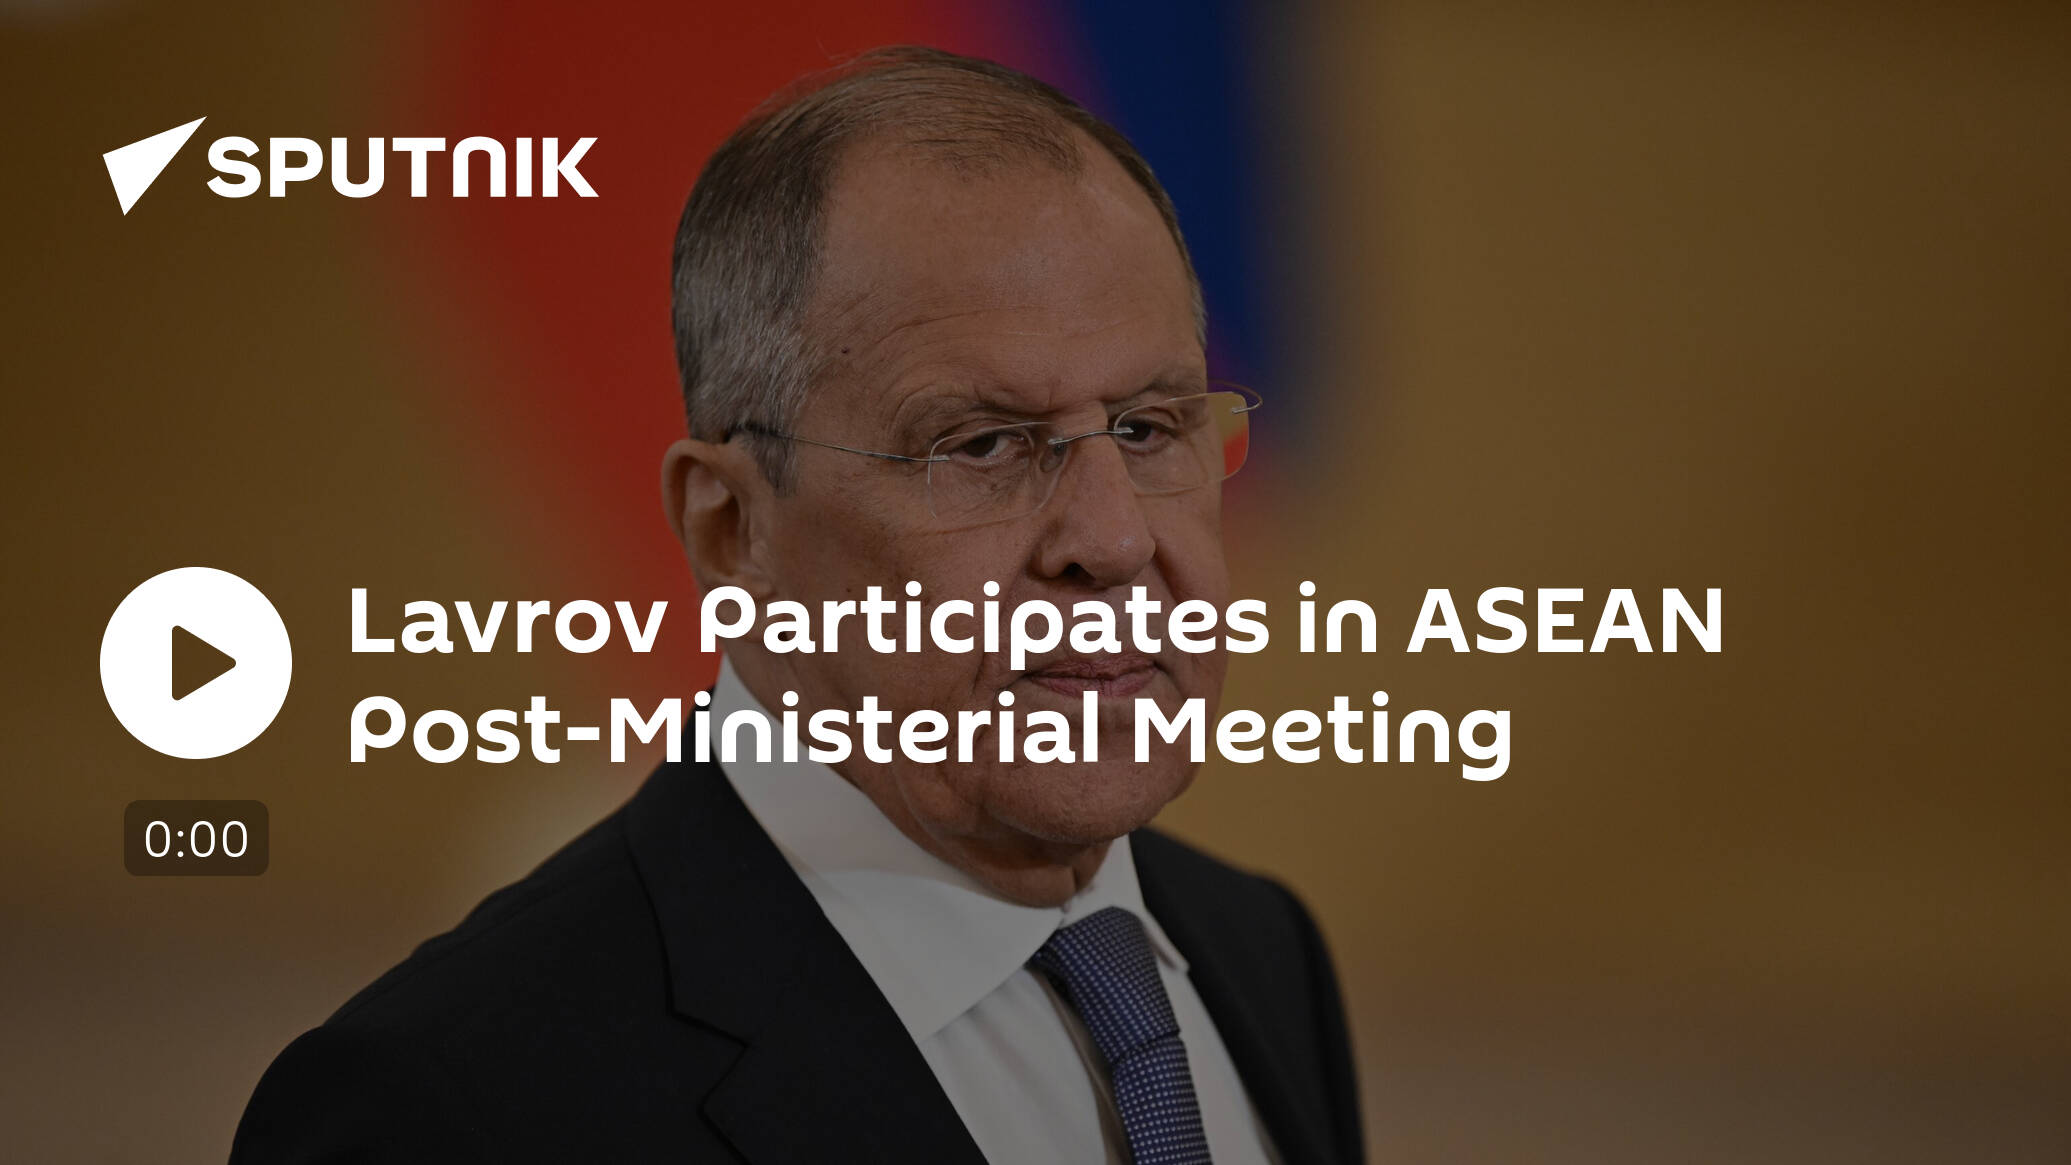 Lavrov Participates in ASEAN Post-Ministerial Meeting [Video]